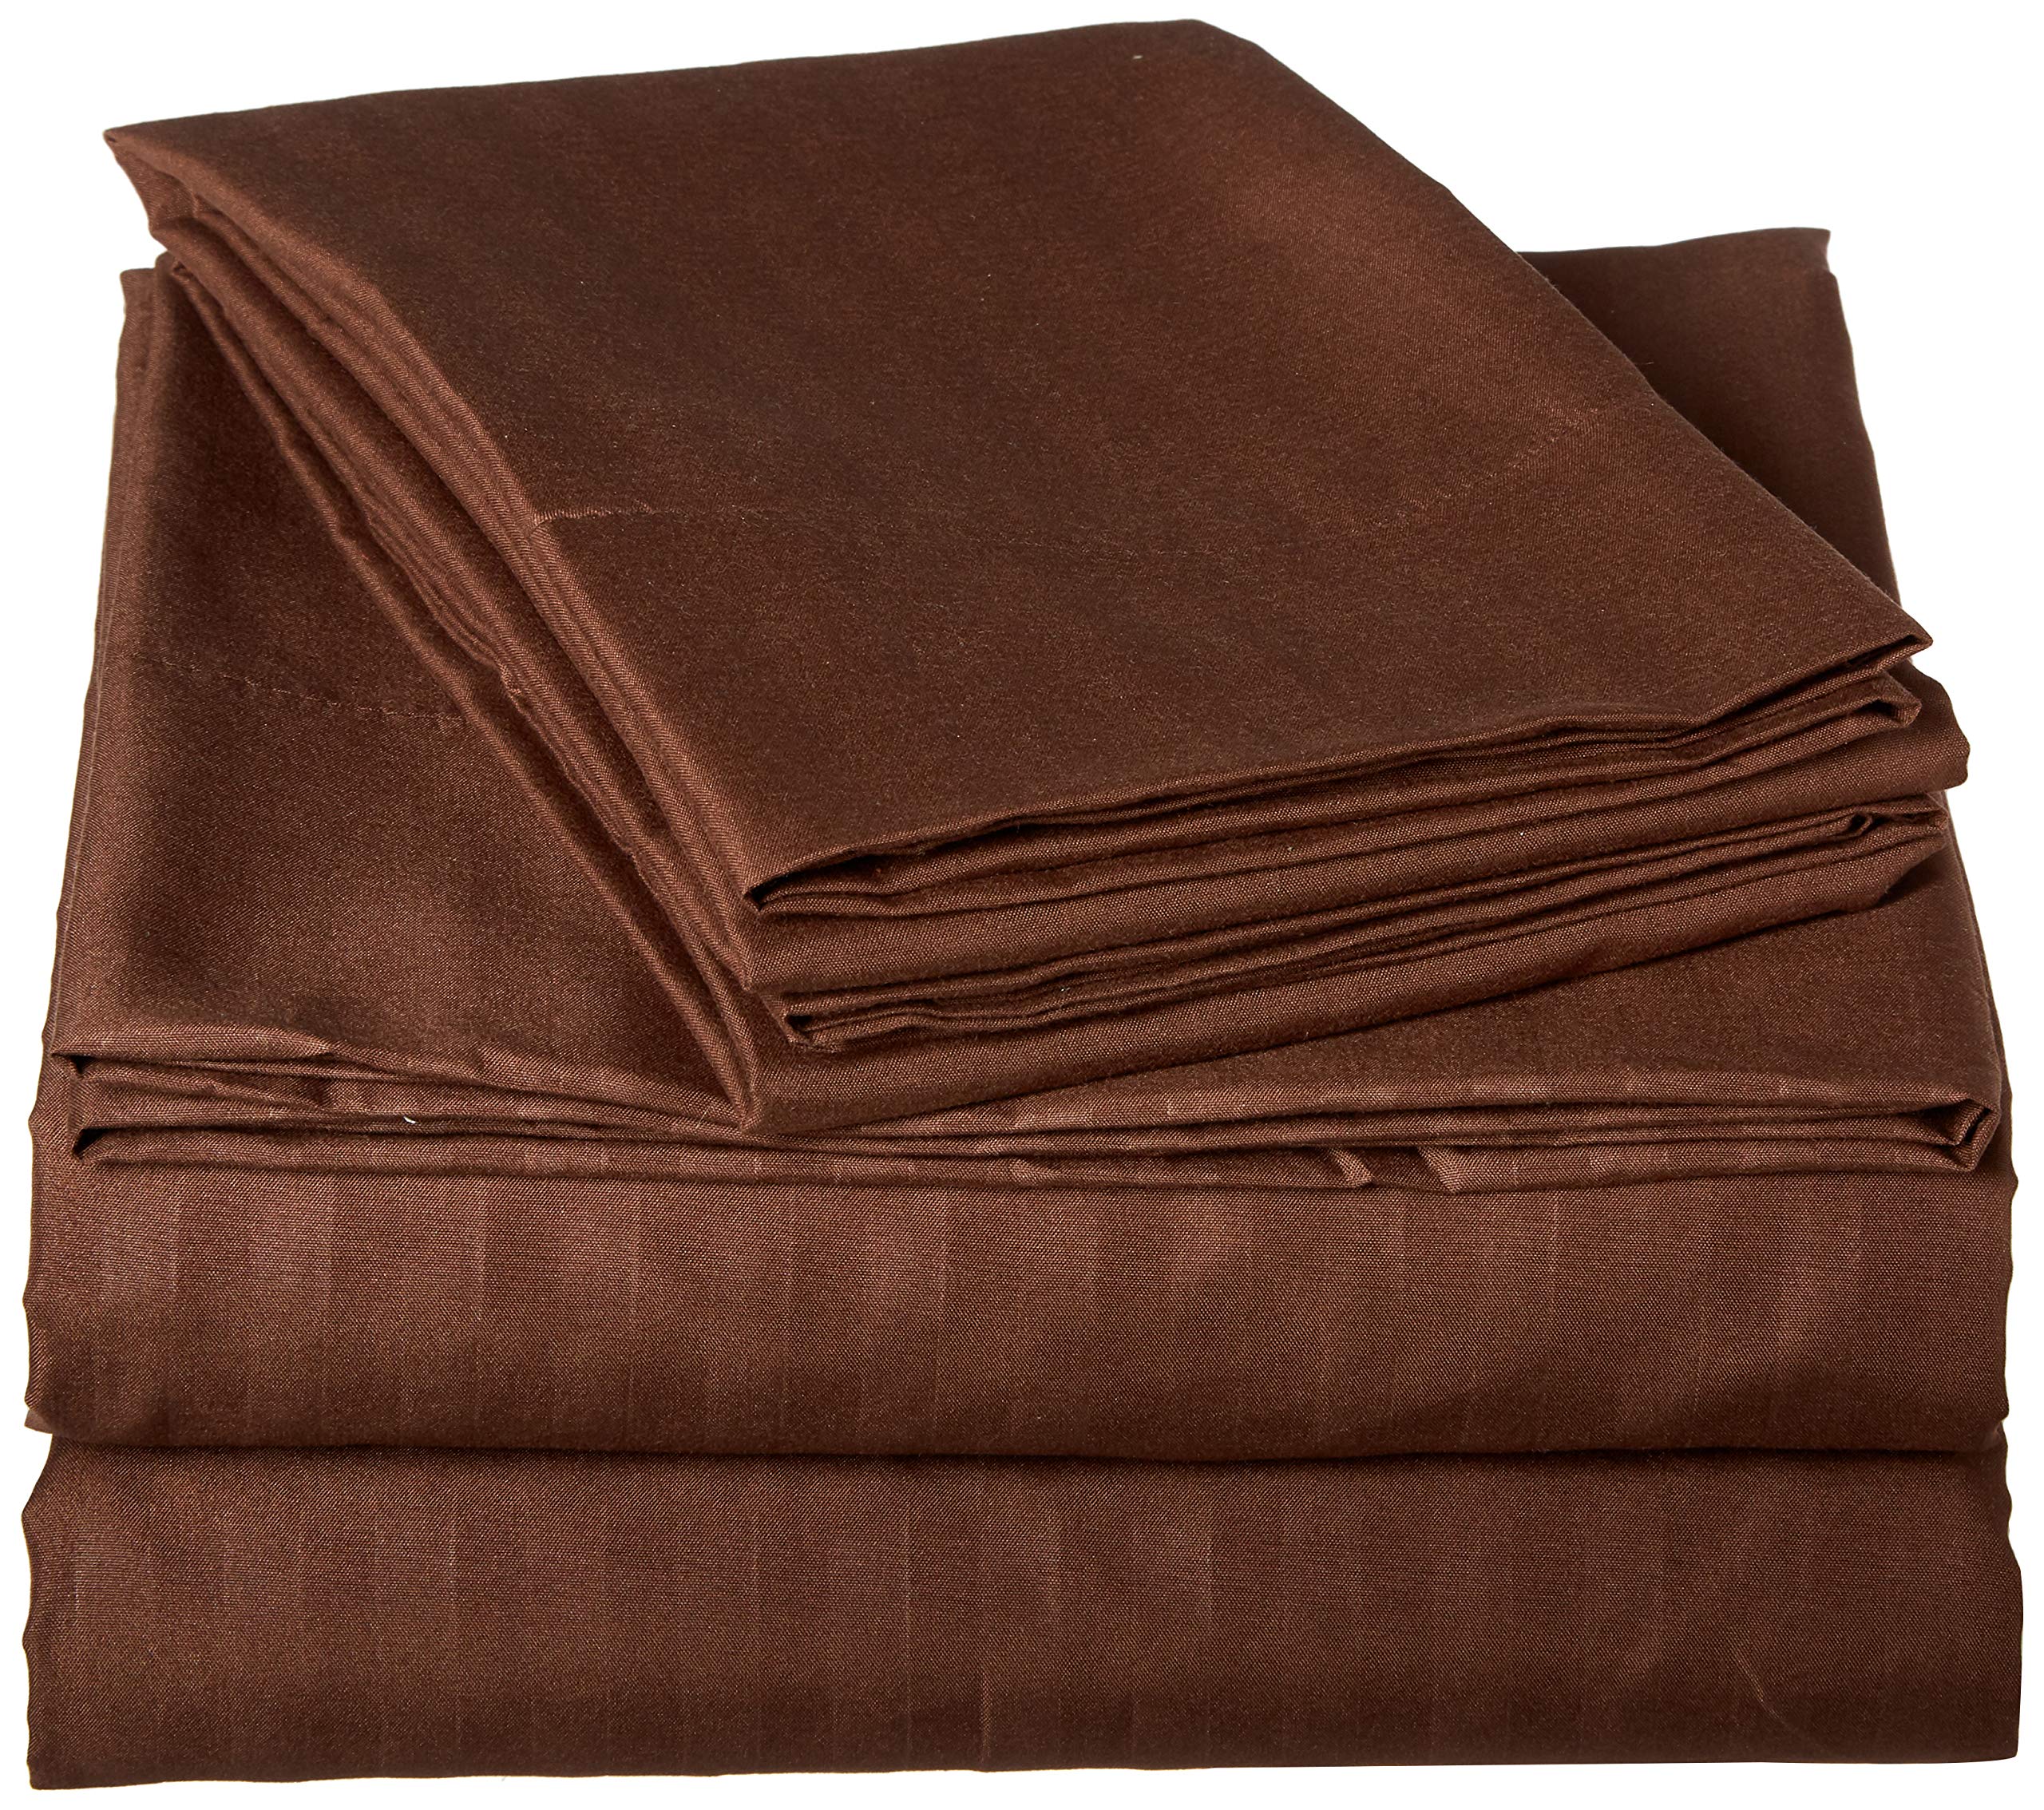 Book Cover London Home 4-Piece Bed Sheet Set - Dobby Stripe - 100% Cotton Sateen - 400 Thread Count - King - Coffee